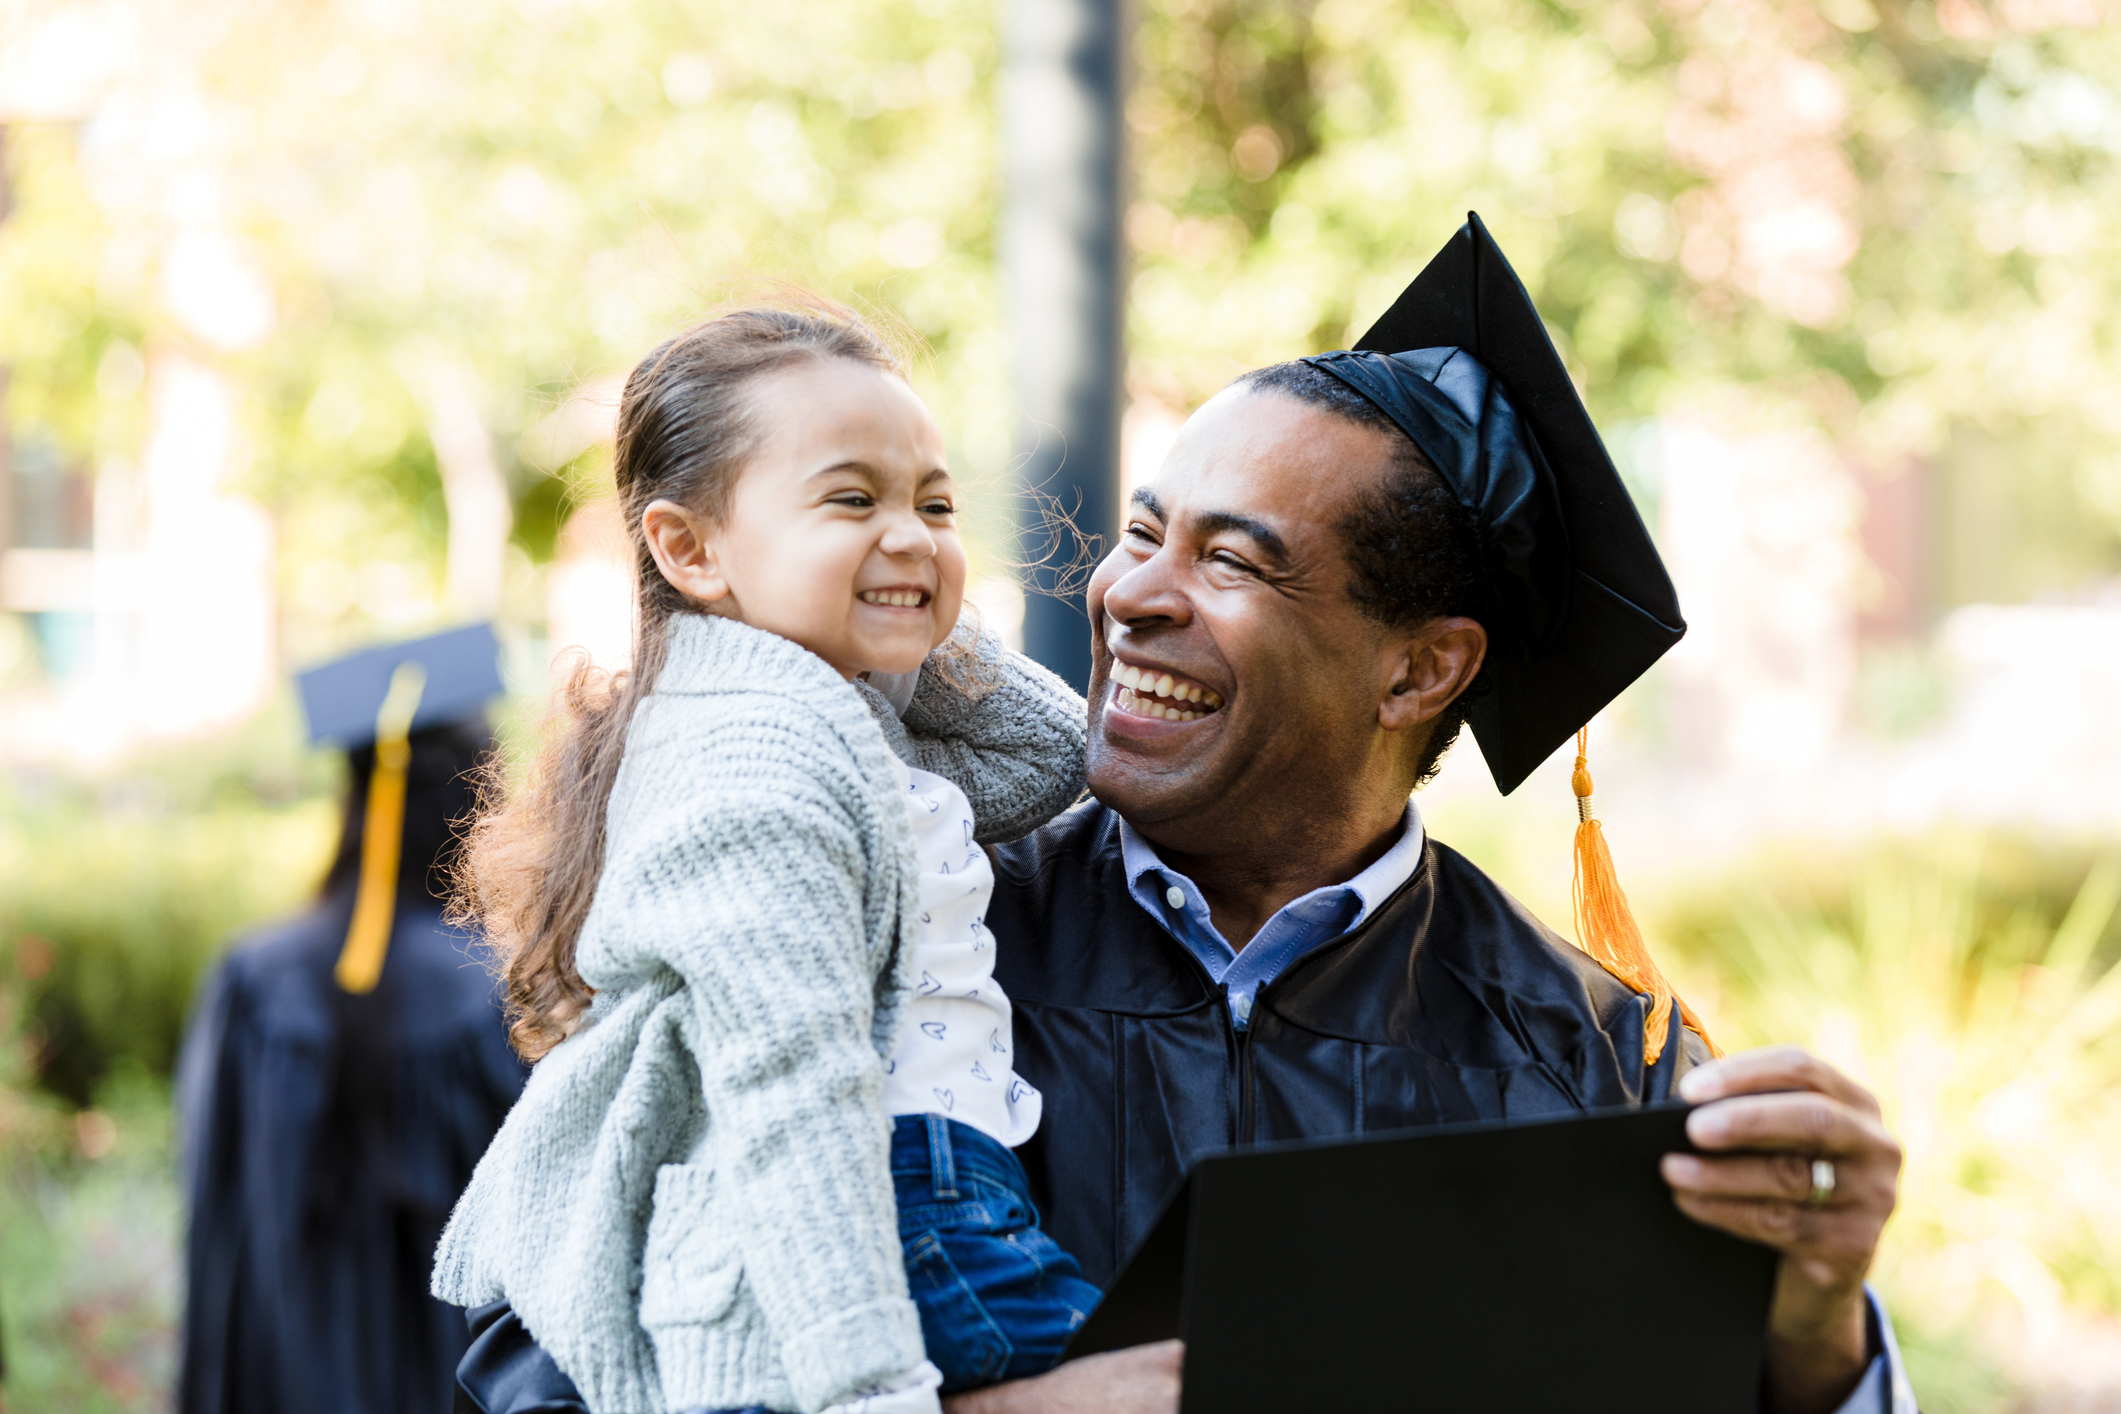 Student Parents in Community Colleges: Building Support Systems to Ensure Education Success